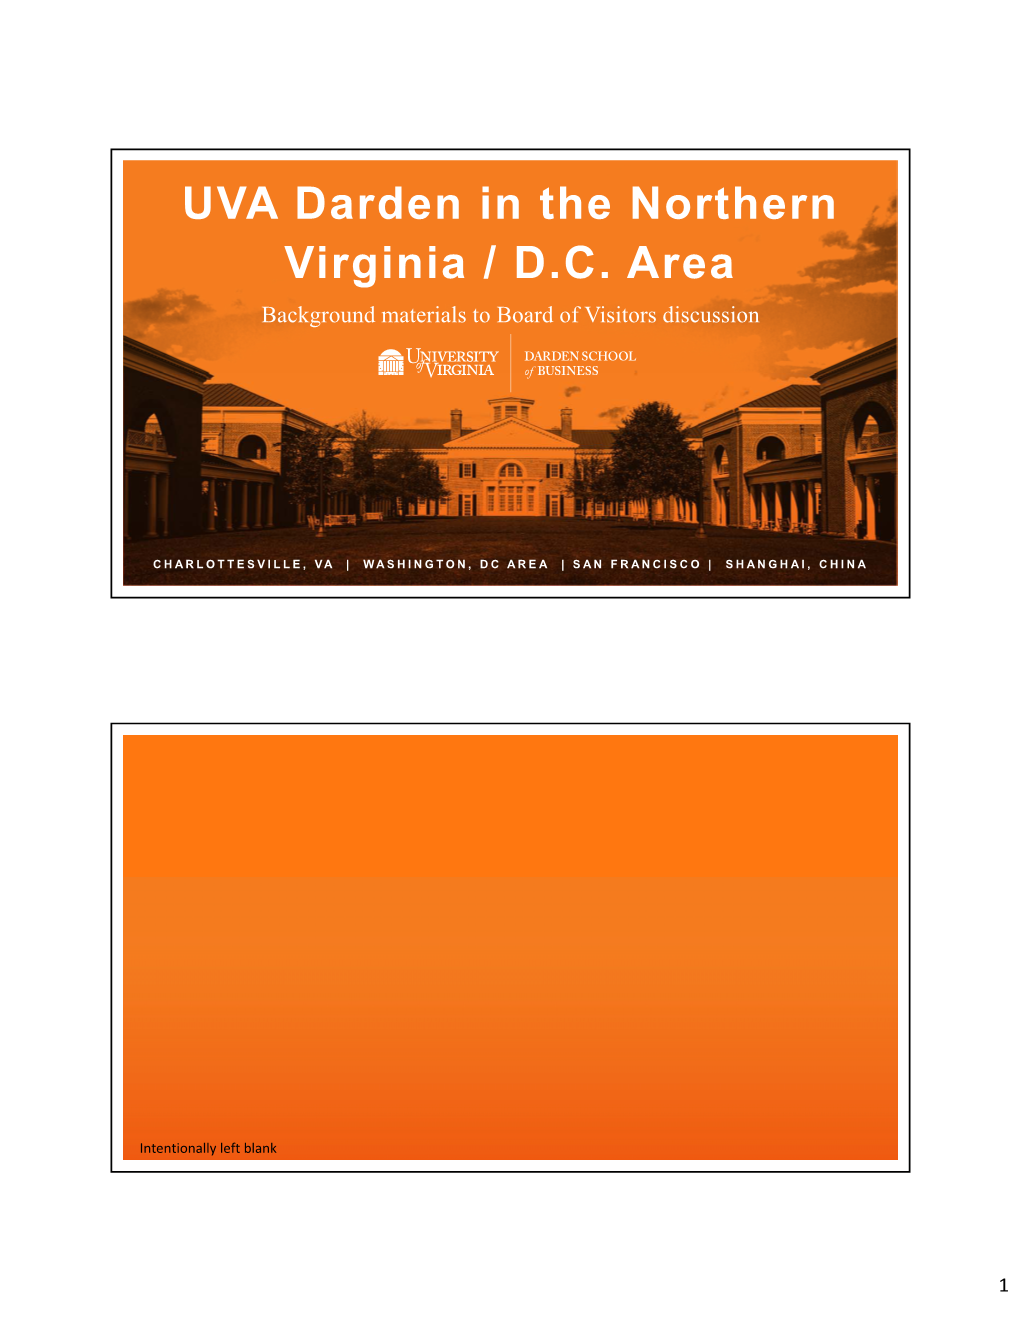 UVA Darden in the Northern Virginia / D.C. Area Background Materials to Board of Visitors Discussion